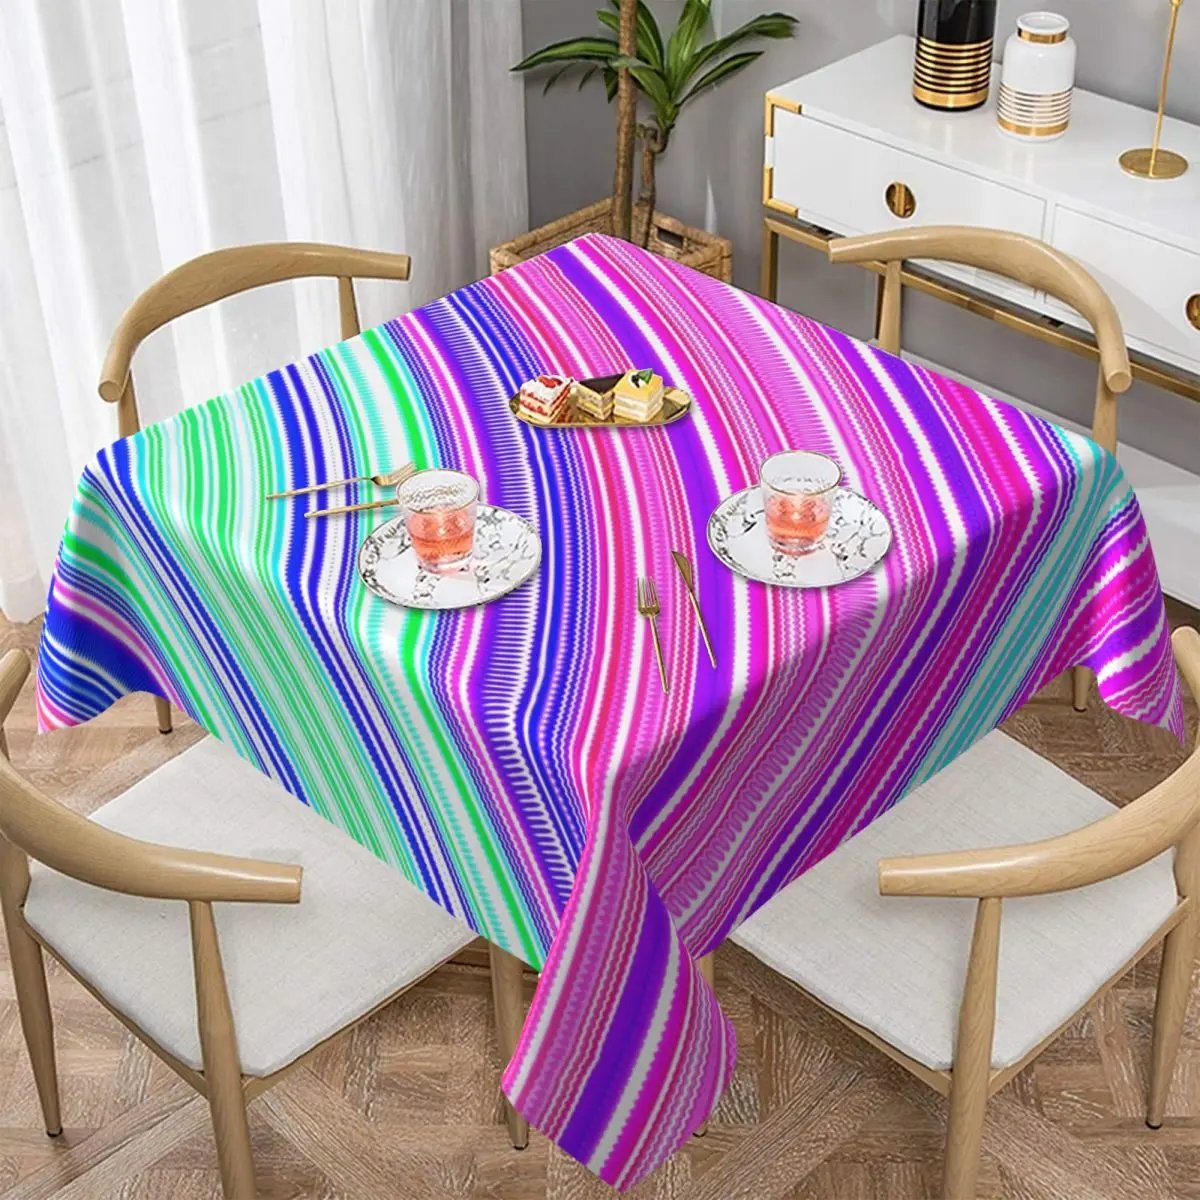 

Colorful Curve Tablecloth Stripes Print Washable Printed Table Cover Picnic Cheap Protector Polyester Table Cloth